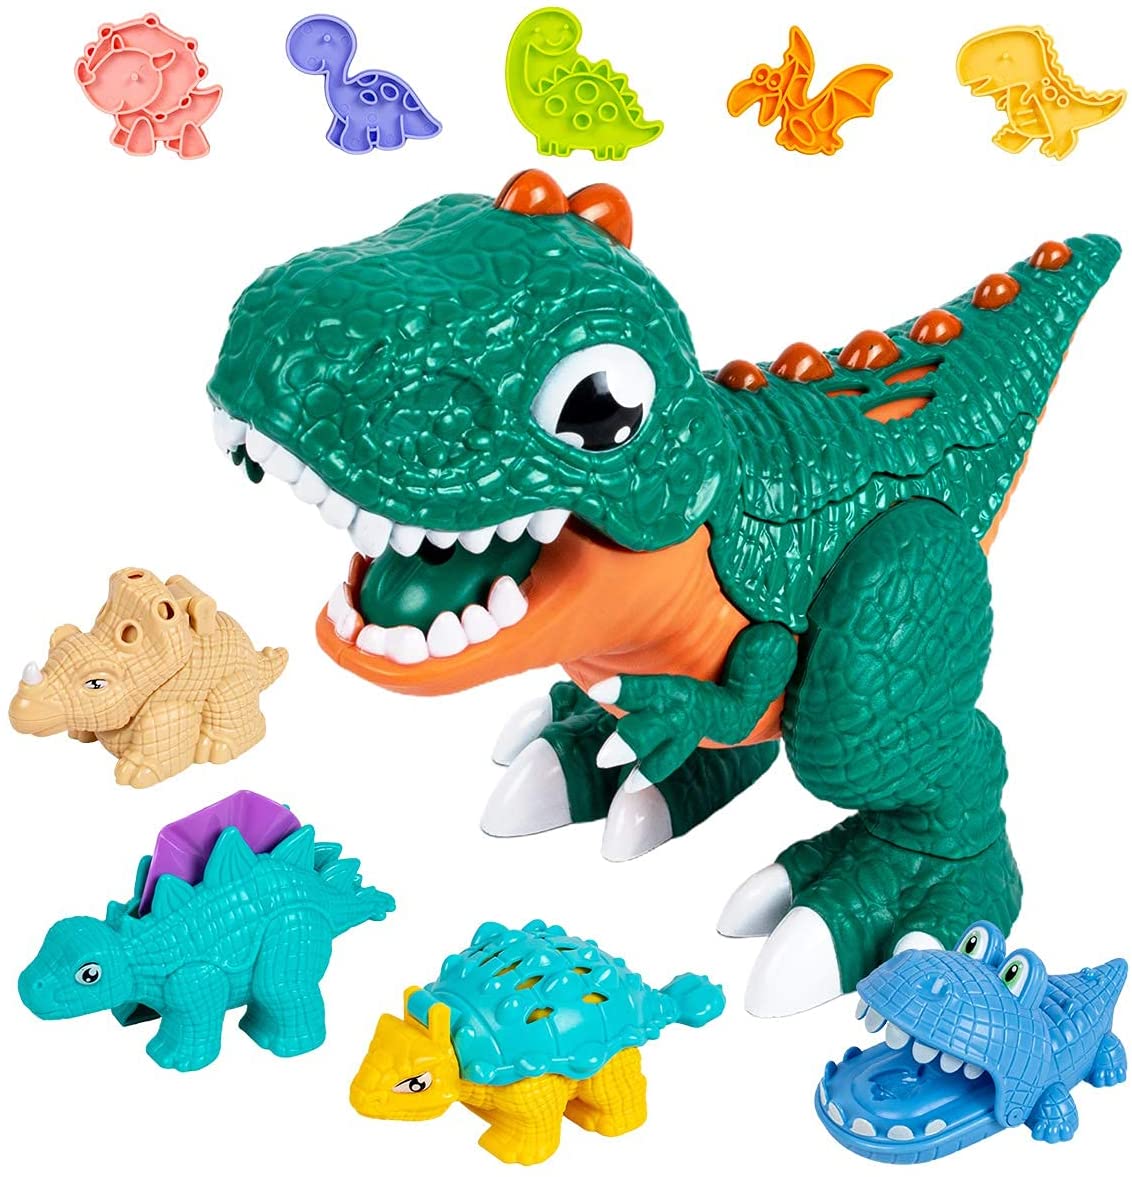 Deardeer Kids Play Dough Dinosaur Play Set 26 Pcs Pretend Play Toy Kit with Dough and Moulds in a Portable Case 